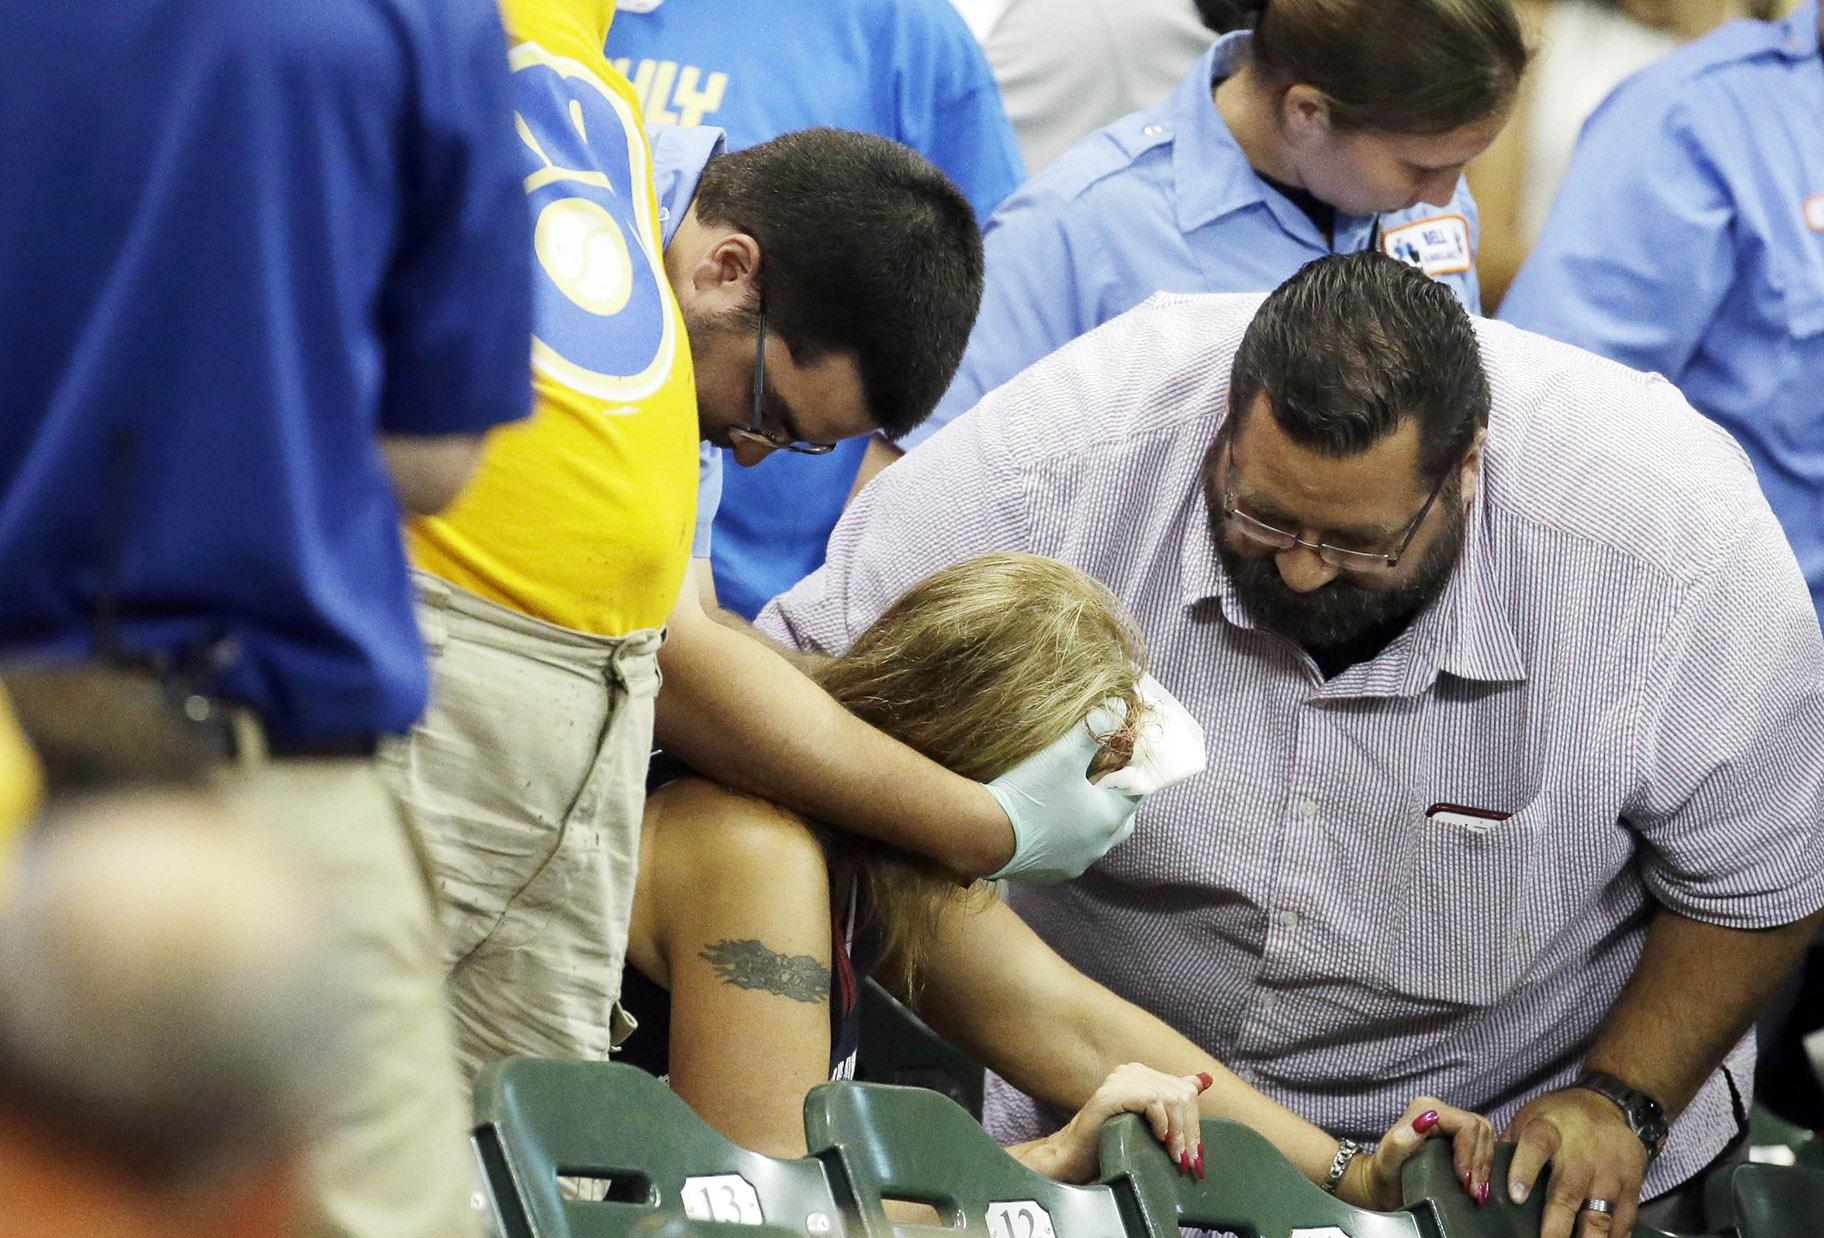 In this July 6, 2015 file photo, a fan is helped after being hit by a foul ball during the ninth inning of a baseball game between the Milwaukee Brewers and the Atlanta Braves in Milwaukee. (AP Photo / Morry Gash, File)